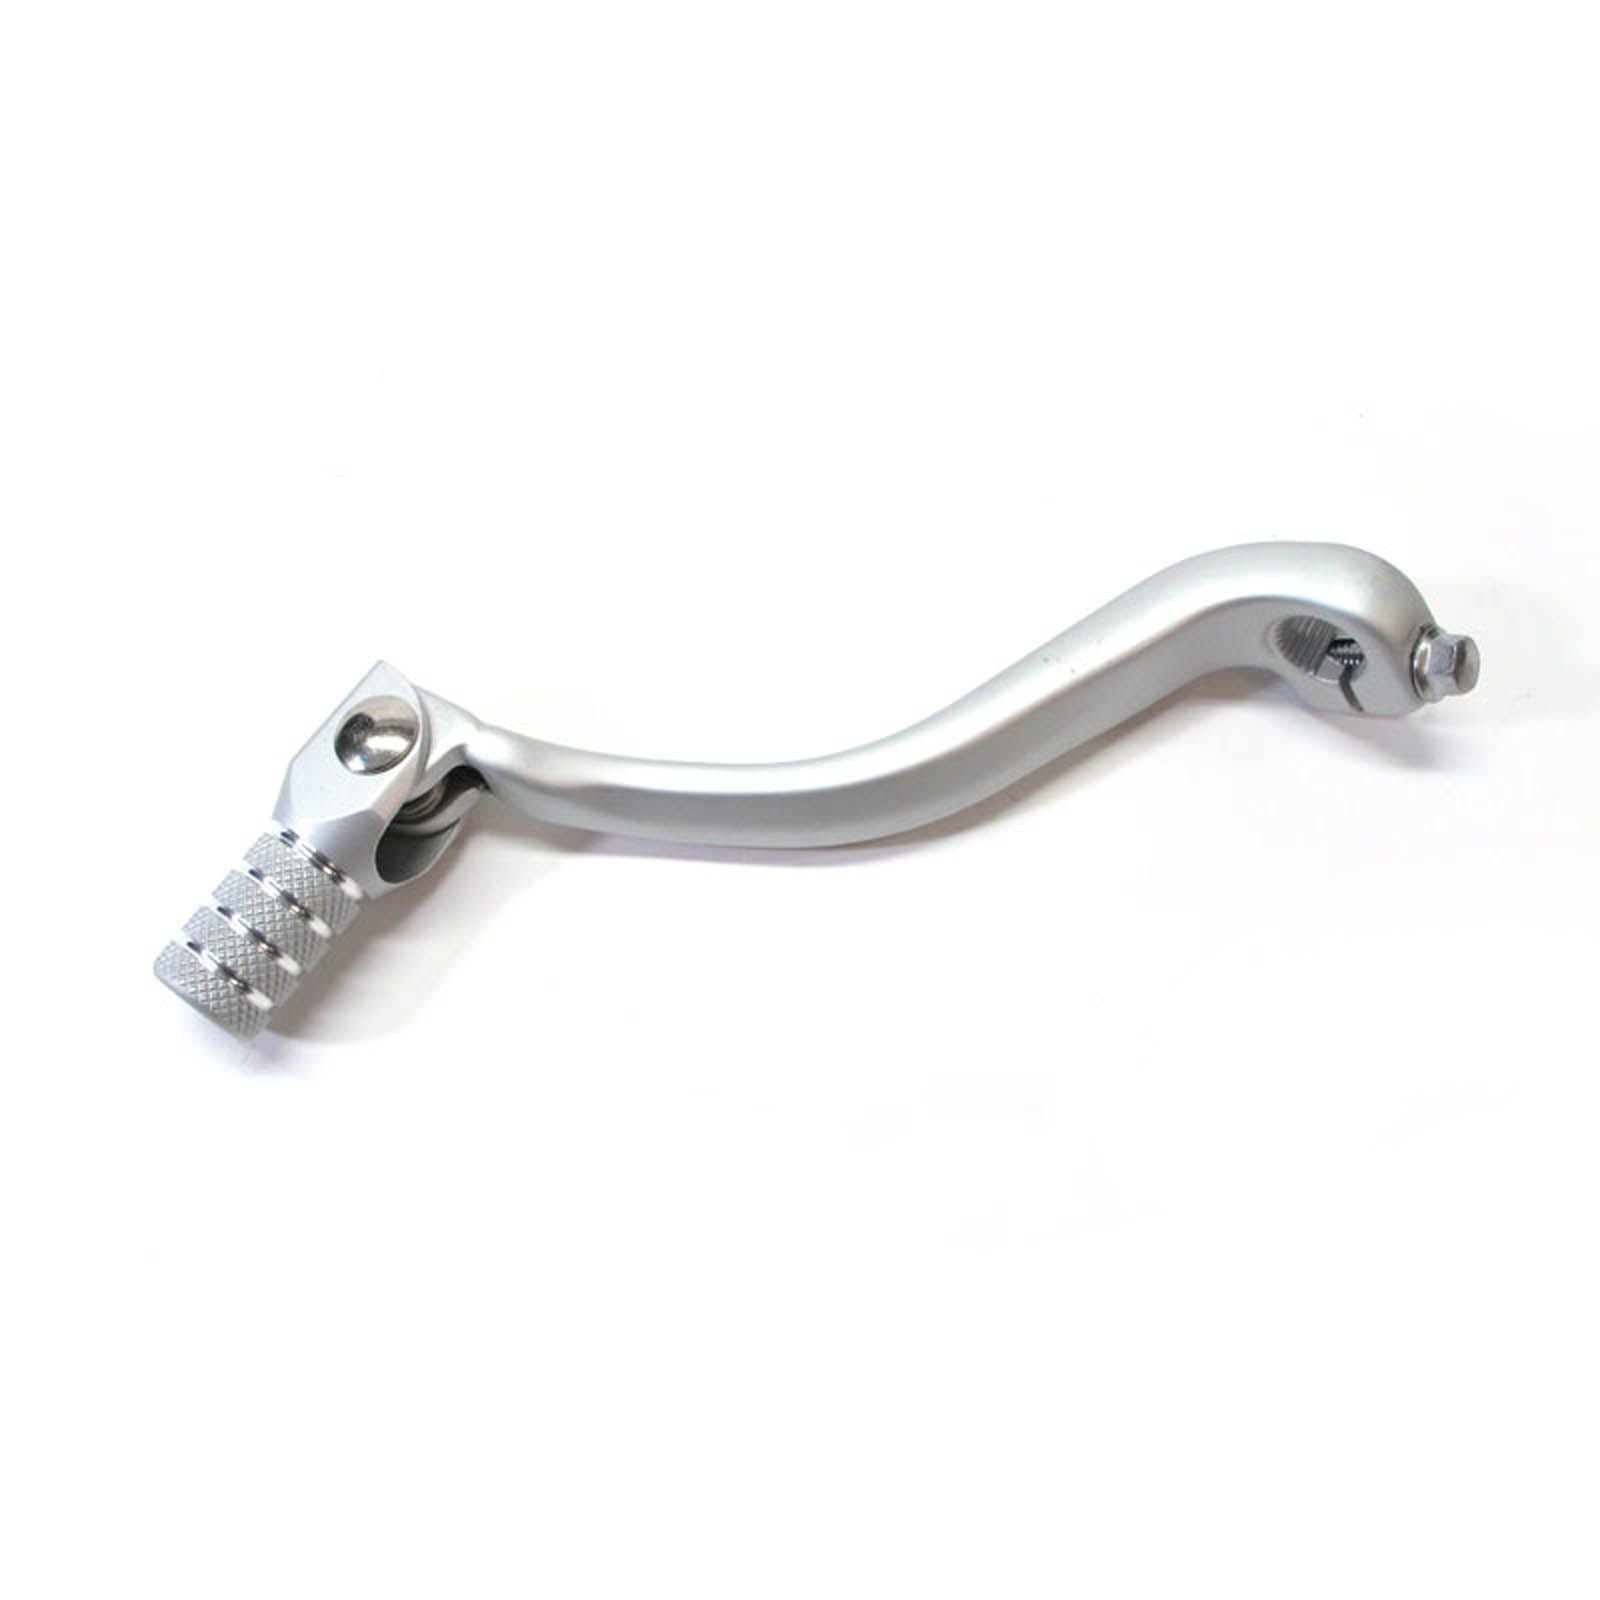 New WHITES Gear Lever Alloy For Honda CRF250R 2010-2016 #GCL87908